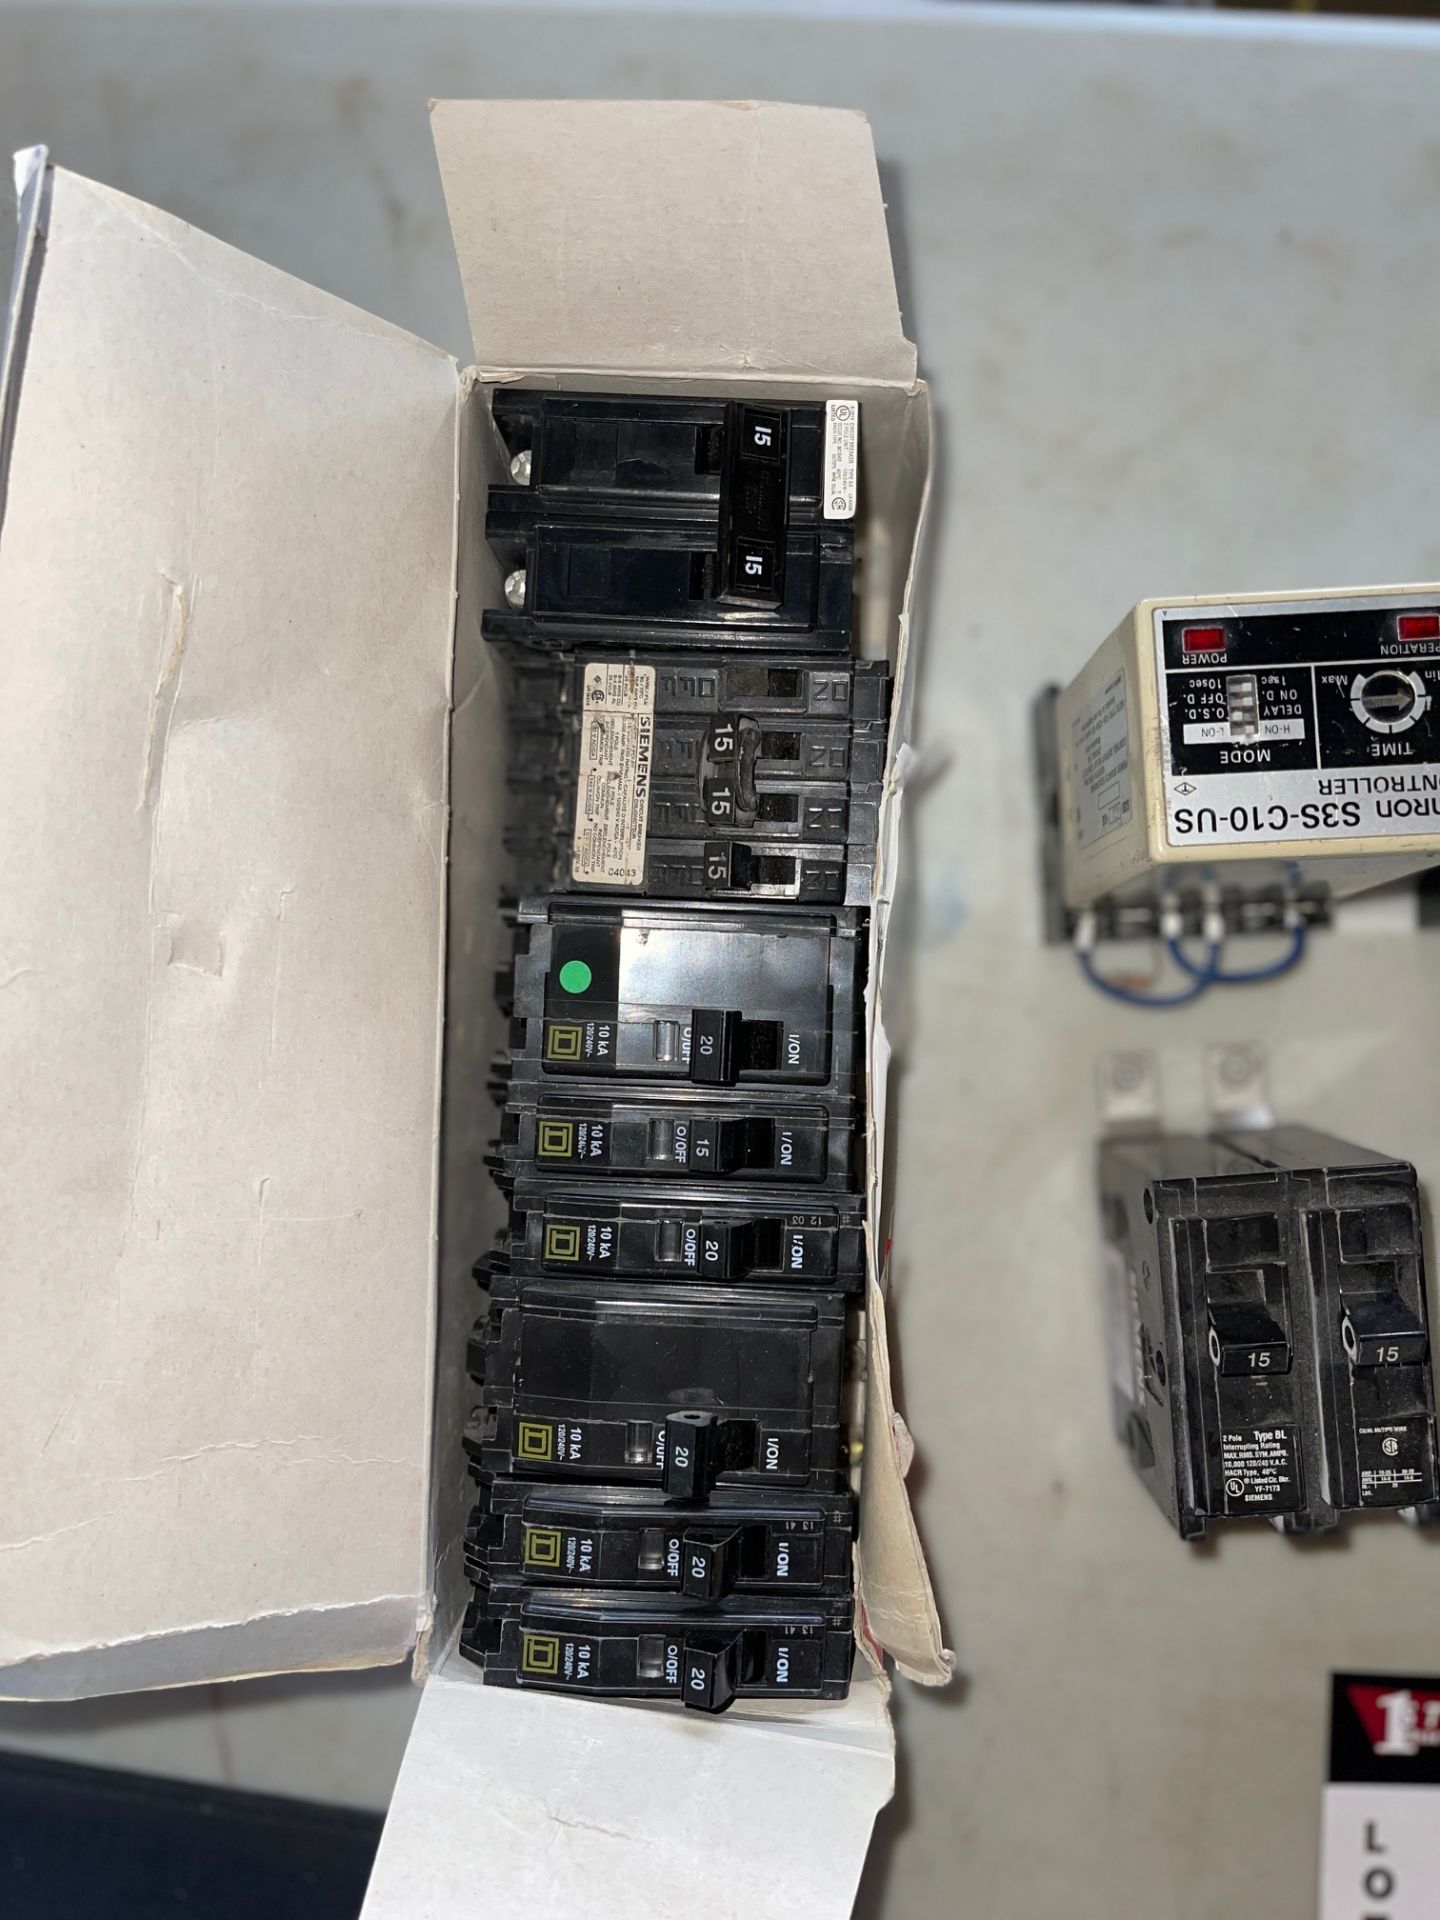 LOT/ OMRON AND CONTROLS, PN-SC3-C10-US, 120/240 INPUT, 5 AMP OUTPUT, CHROMALOX THERMOSTAT, SQUARE - Image 3 of 3